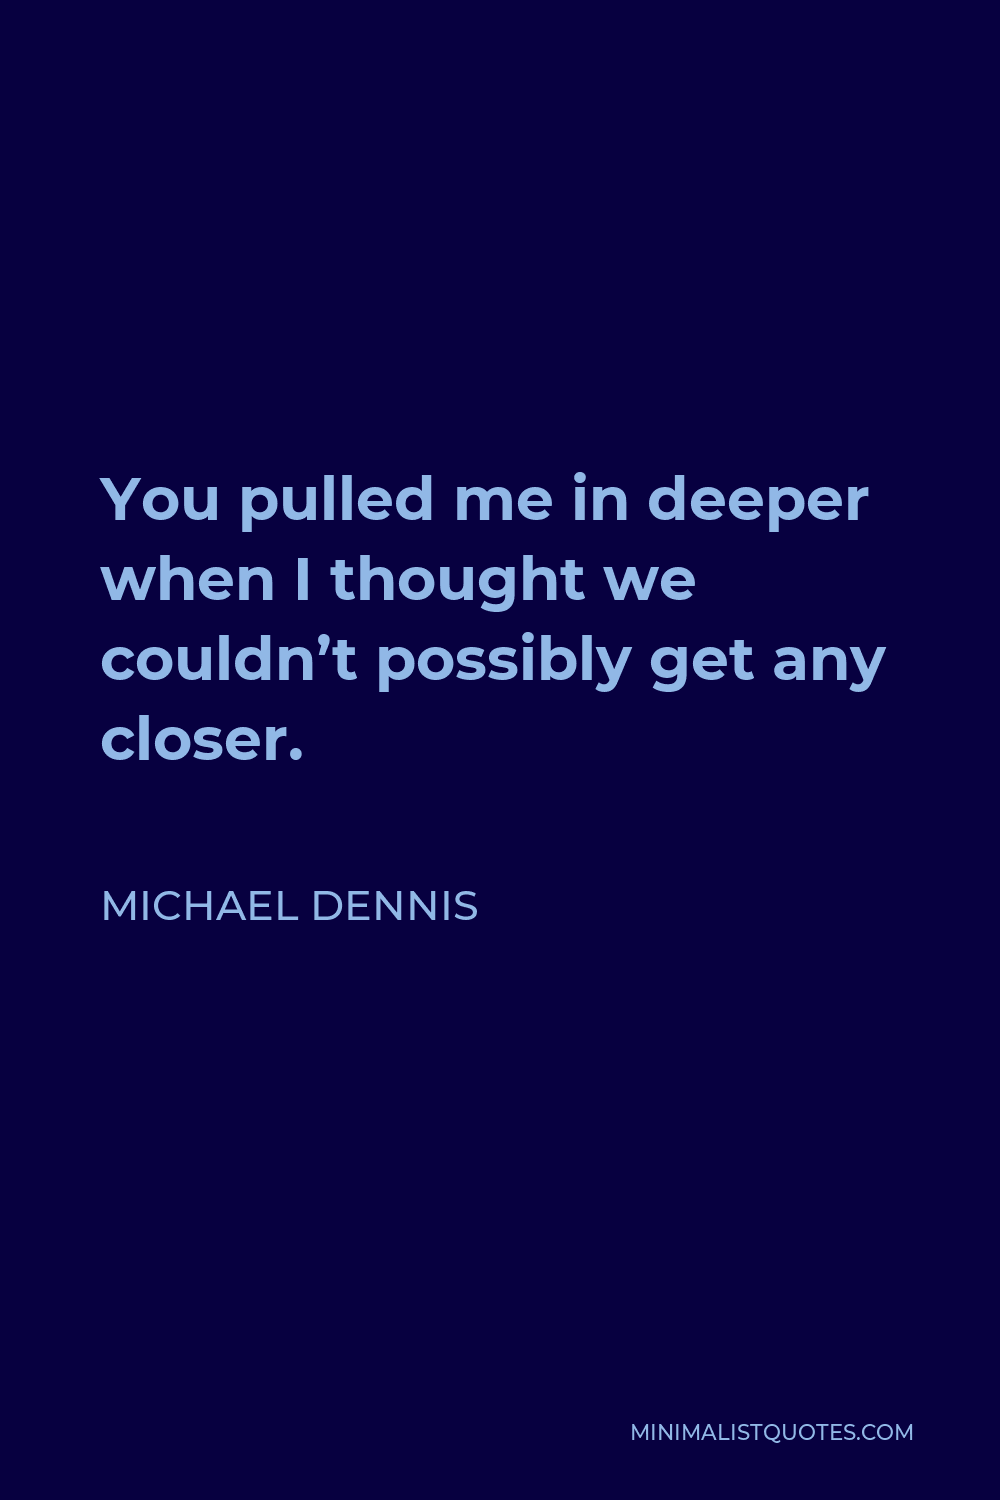 Michael Dennis Quote - You pulled me in deeper when I thought we couldn’t possibly get any closer.